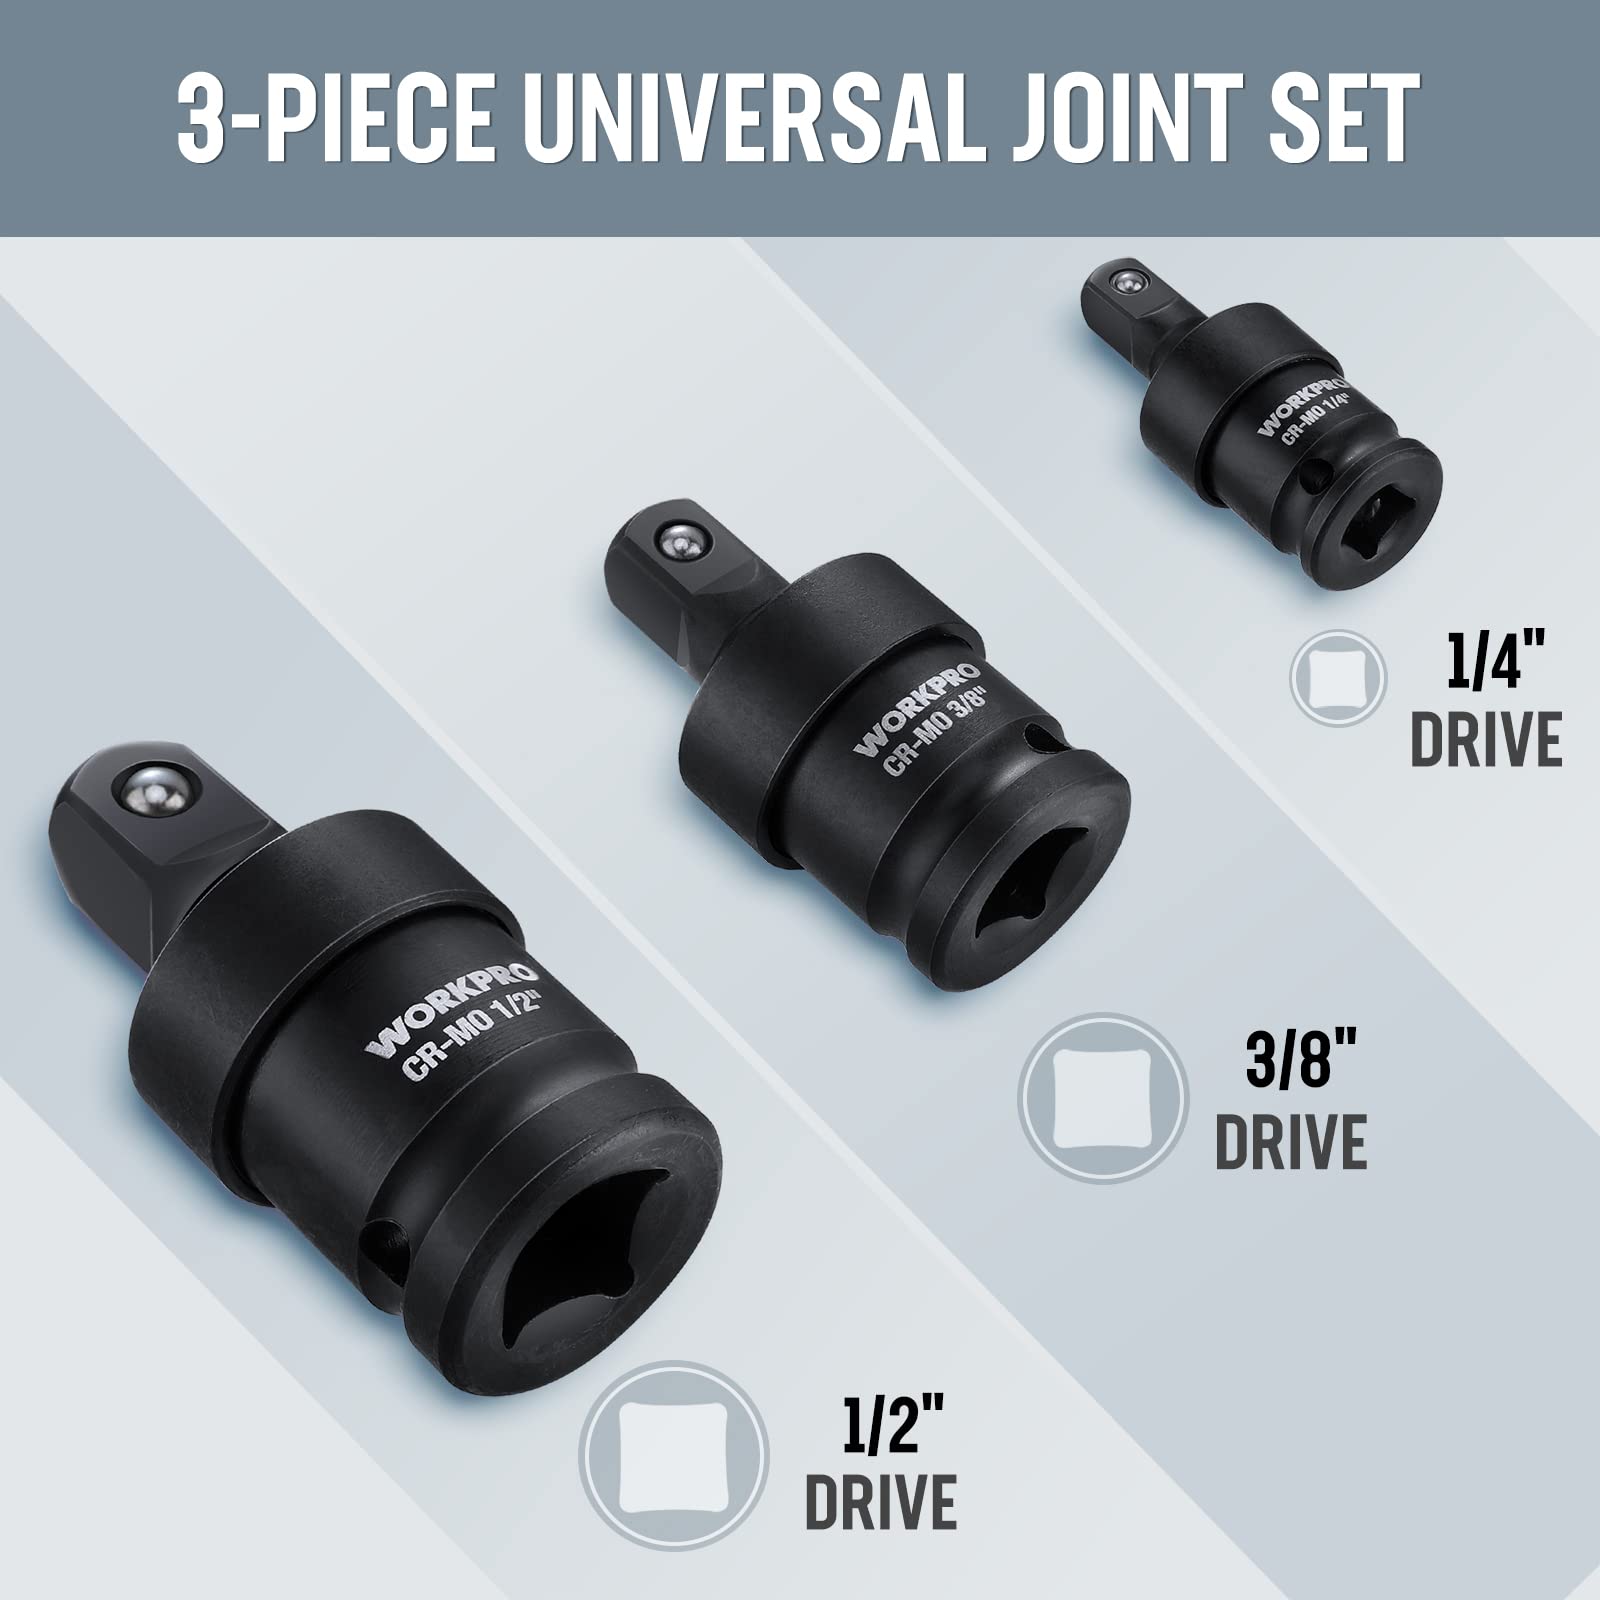 WORKPRO Impact Universal Joint Set, 3 Piece-1/2", 3/8", 1/4"Inch Drive Swivel Socket Set, Socket Adapter Set, Premium CR-MO Steel, Impact Grade, 360 Degree Rotation for Various Angles